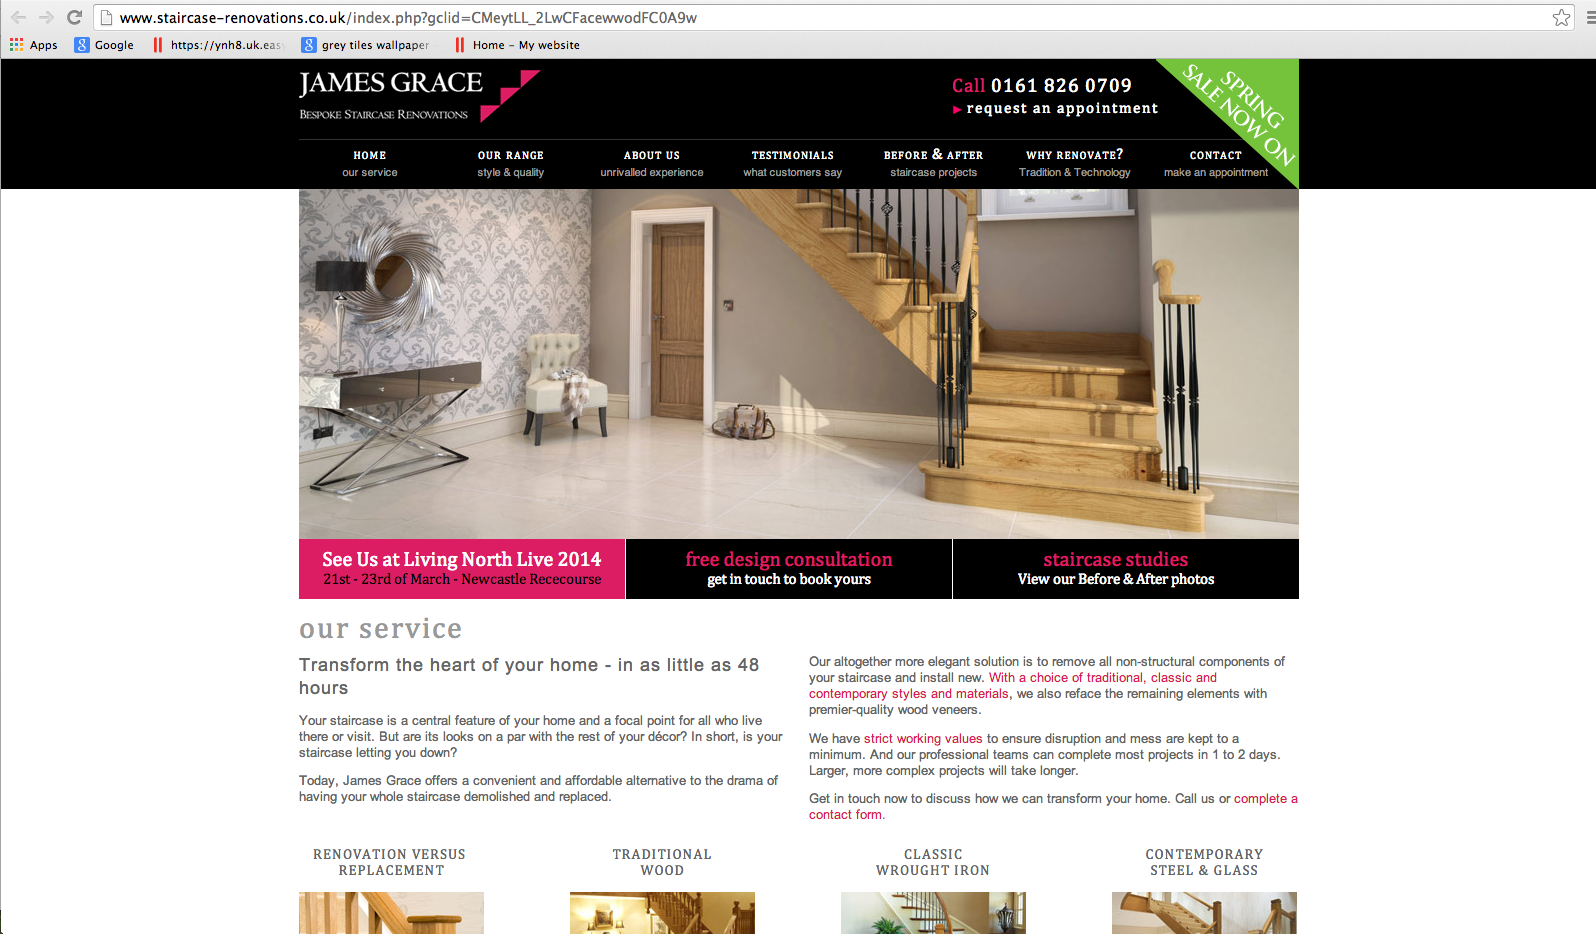 Staircase Renovations Website Review